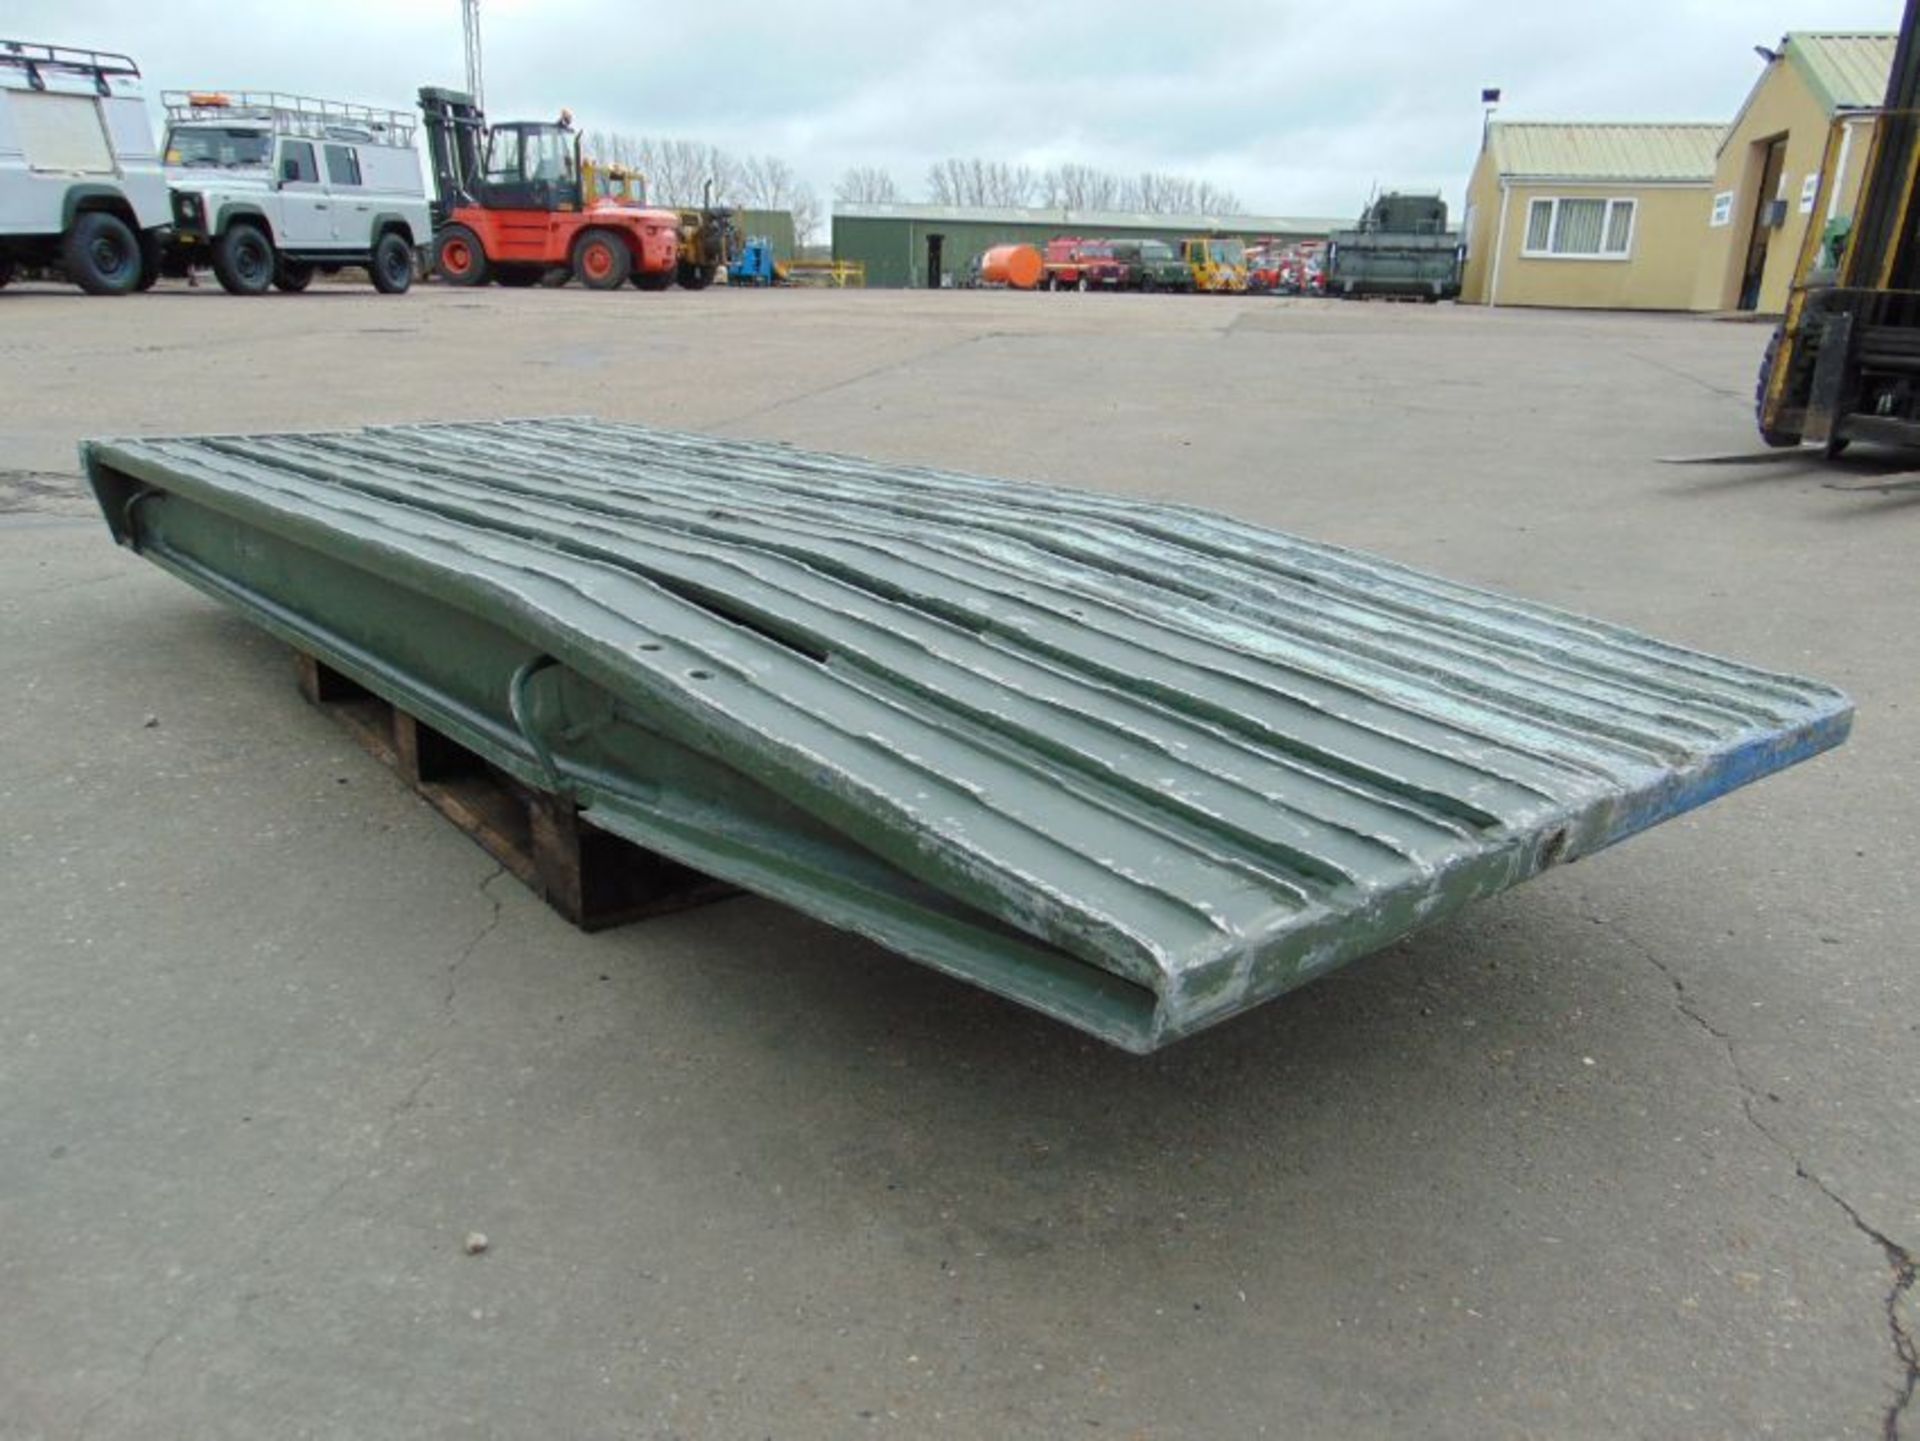 Pair of Very Heavy Duty Aluminium Clip on Vehicle Loading Ramps, 3 m long, 0.54 m wide - Image 2 of 6